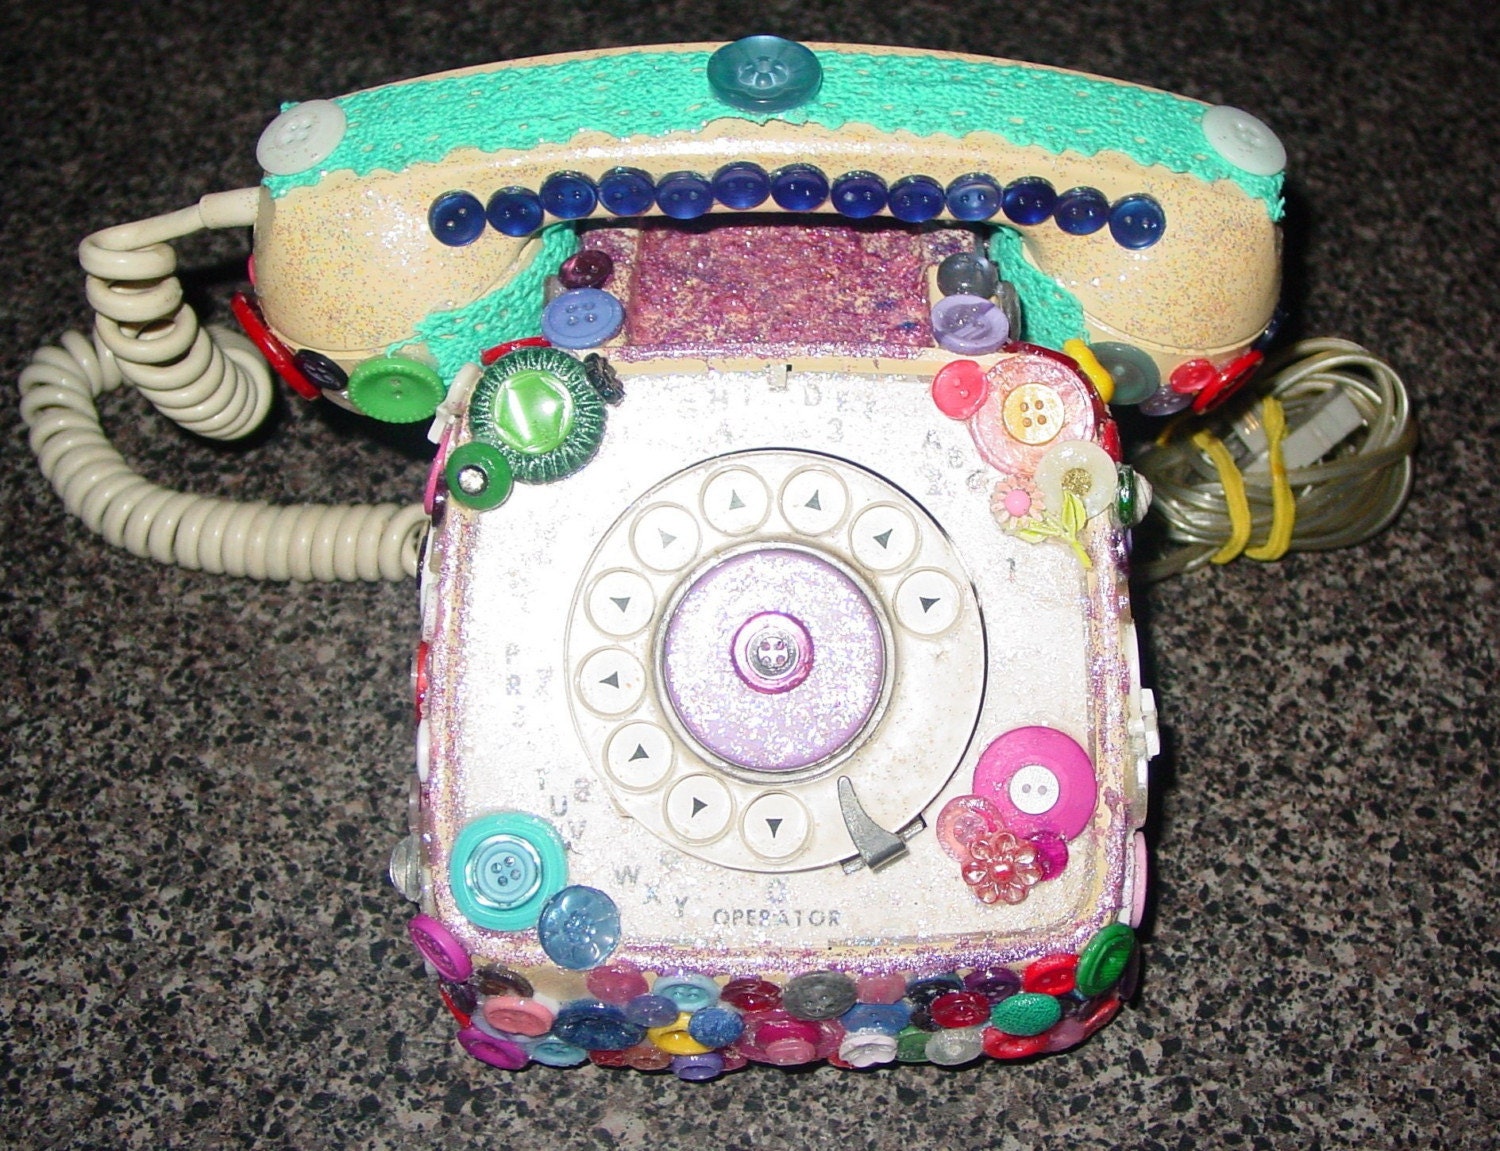 recycled vintage dial button phone by M. Reinke.